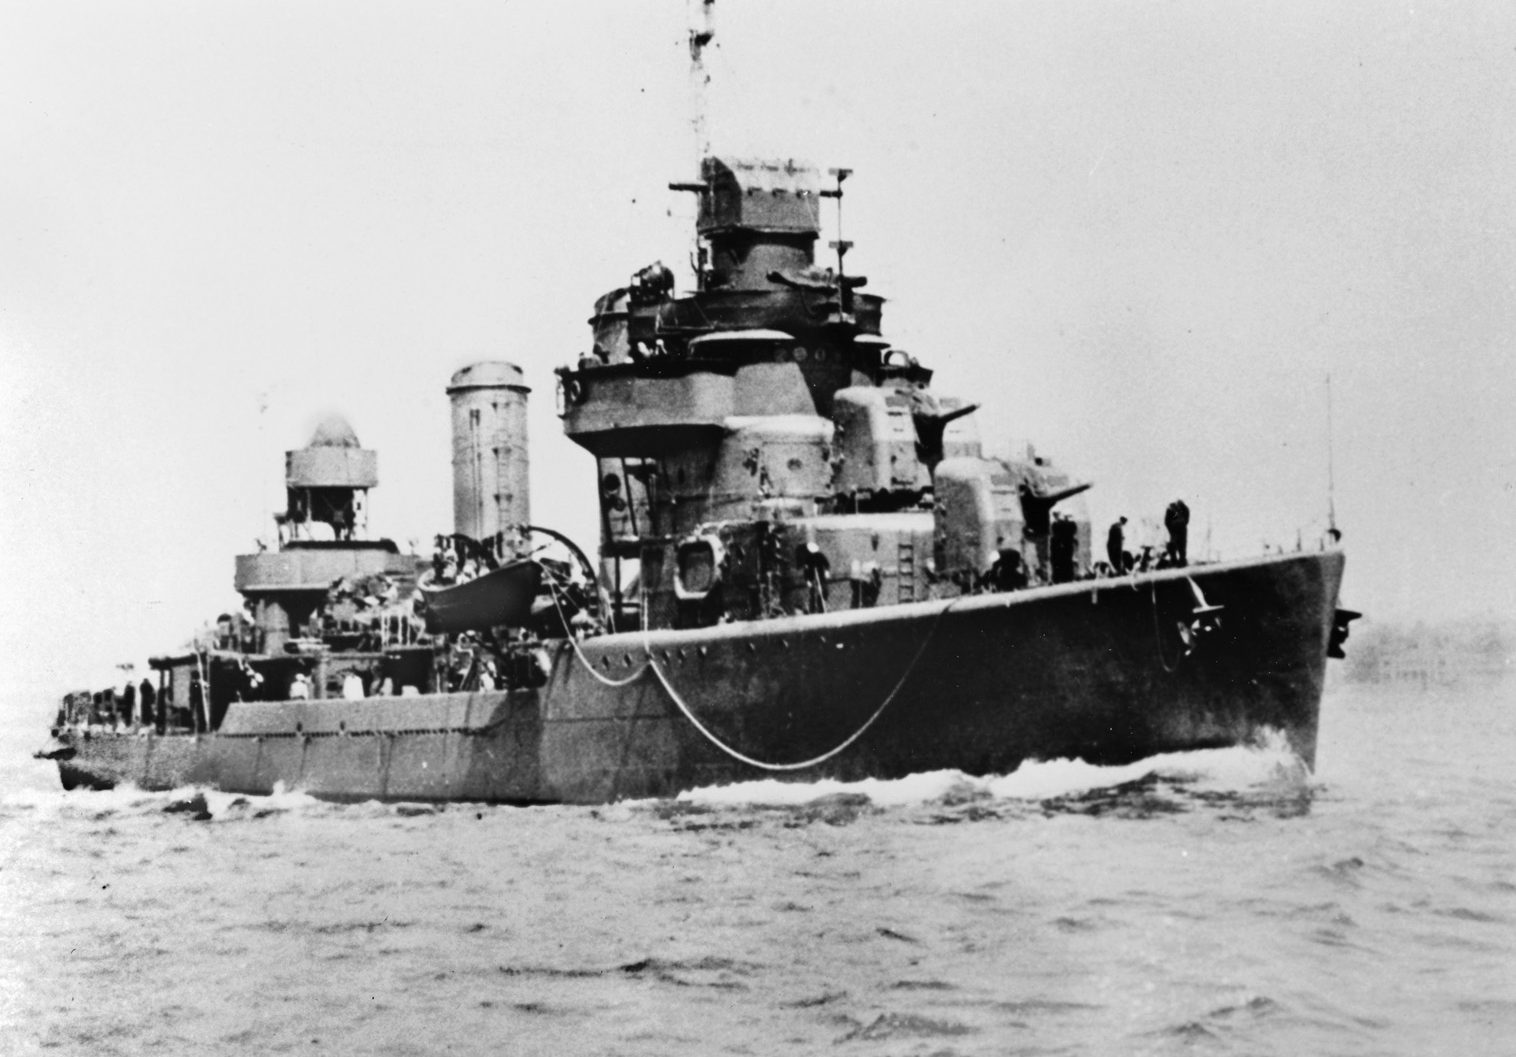 USS Gwin, underway in 1941. The Gleaves-class destroyer had been commissioned in January of that year.